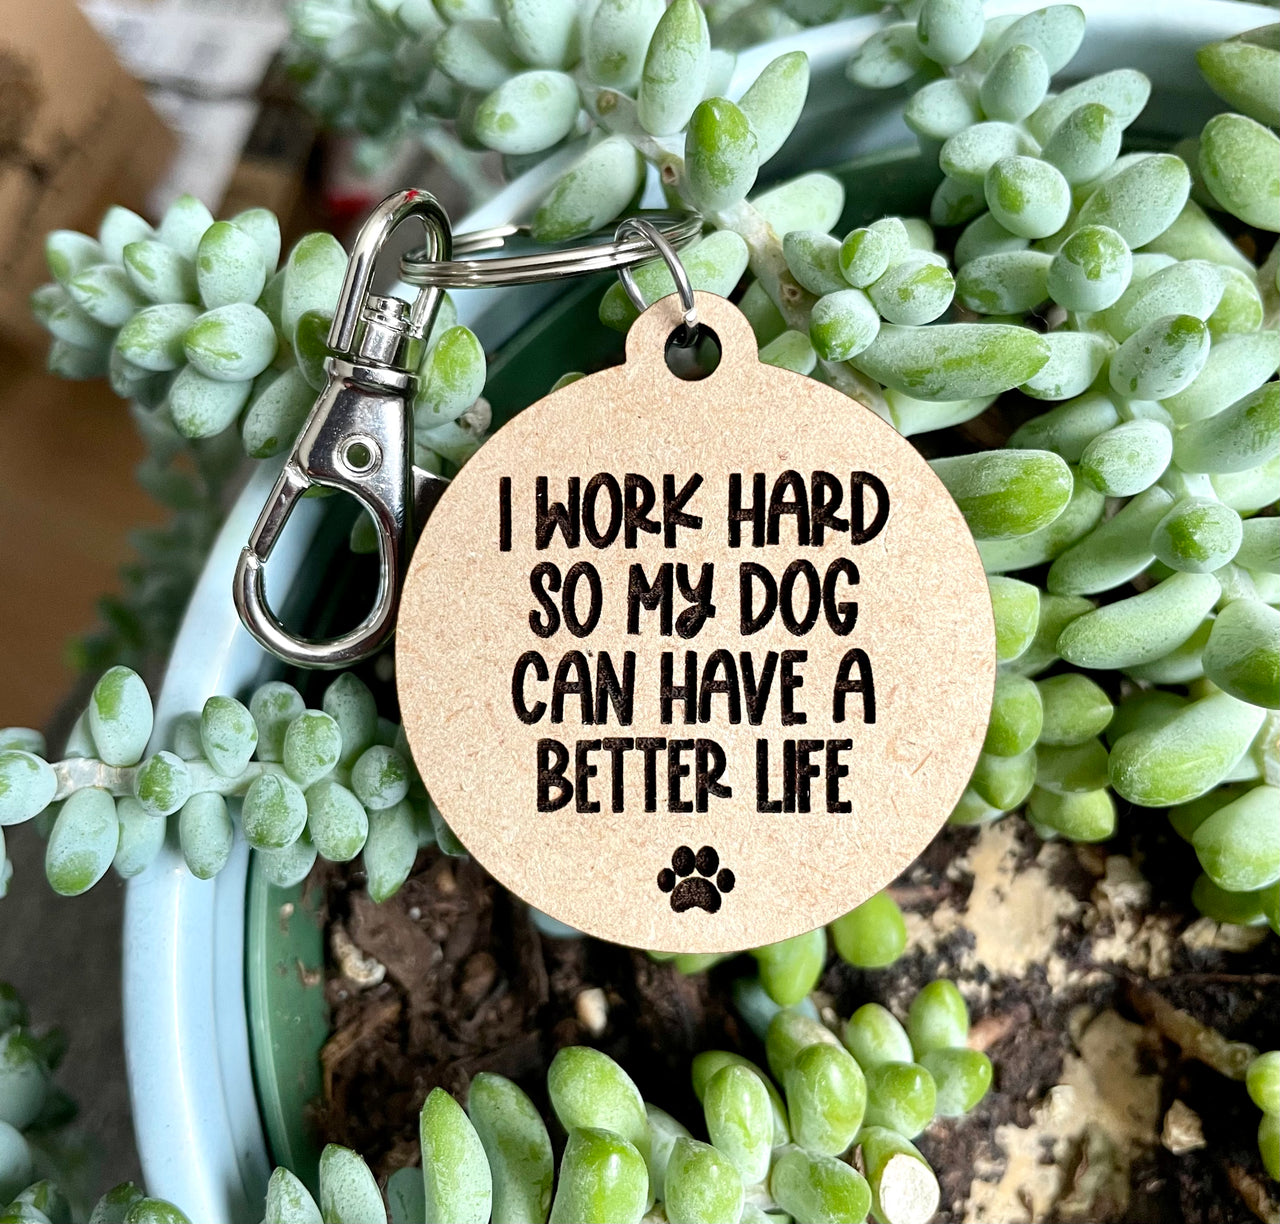 I work hard so my dog can have a better life wooden keychain